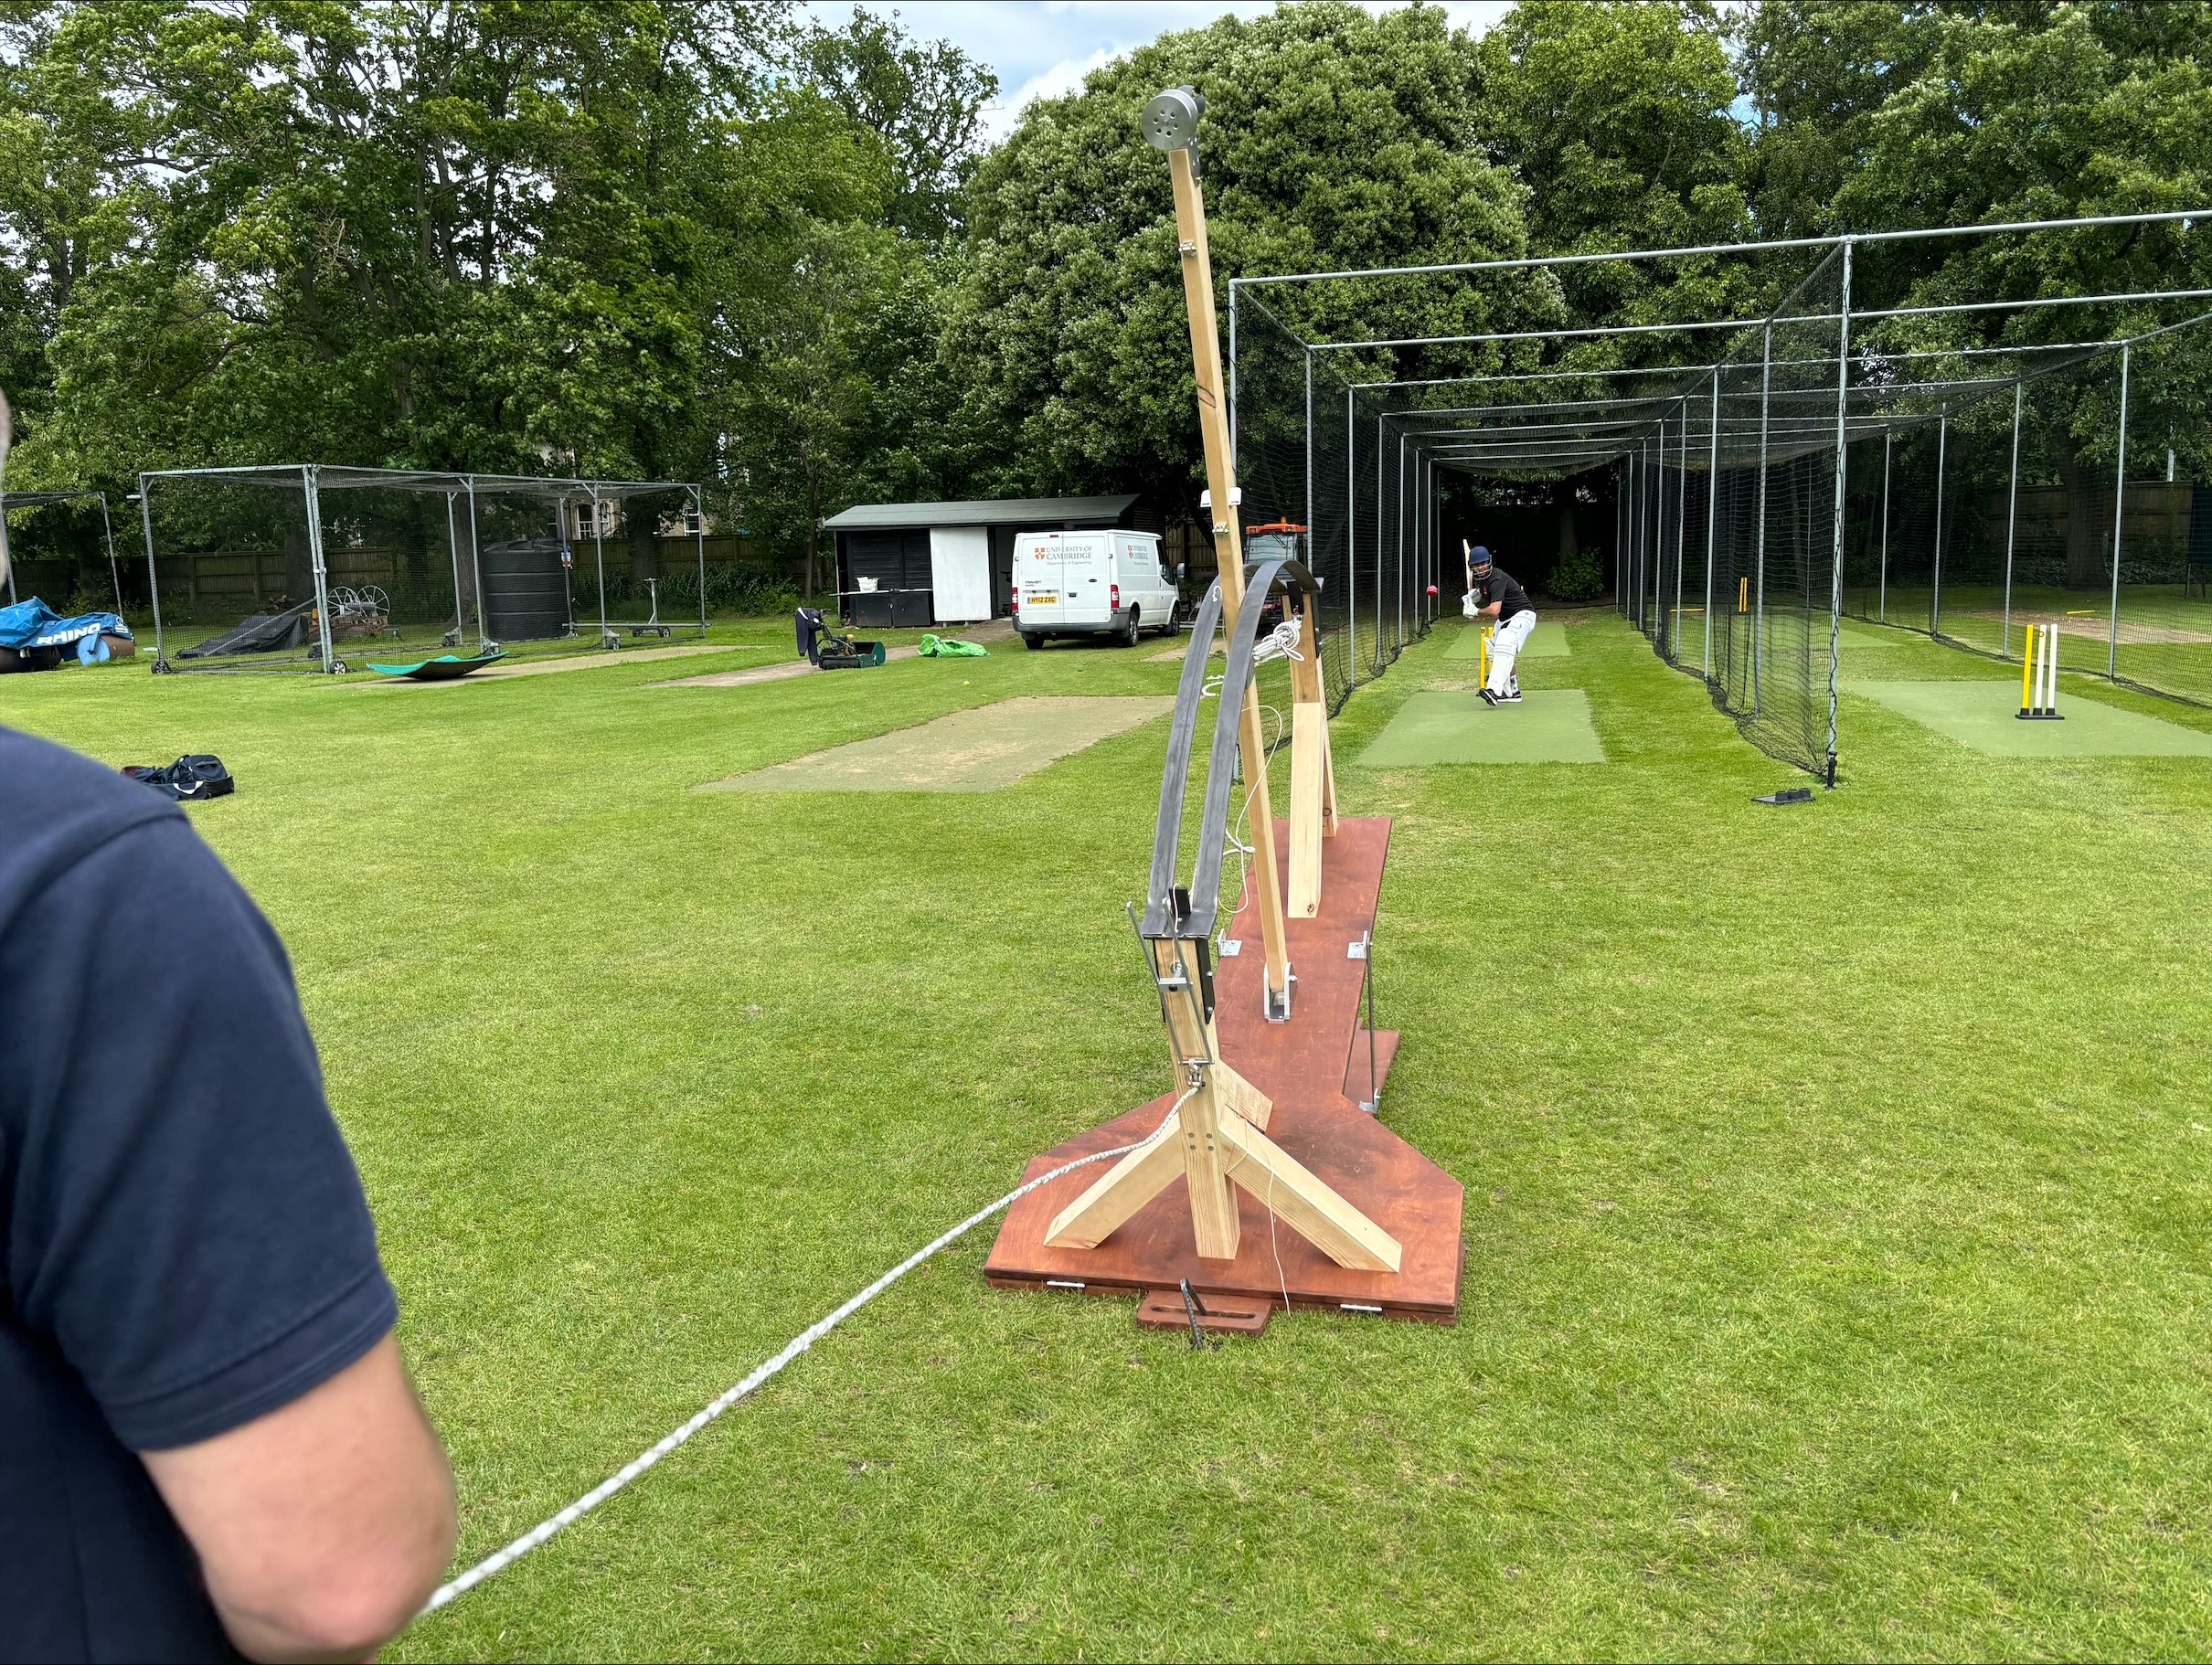 The Venn bowling machine launches a ball at a batter in the nets. (Sam Russell/ PA)